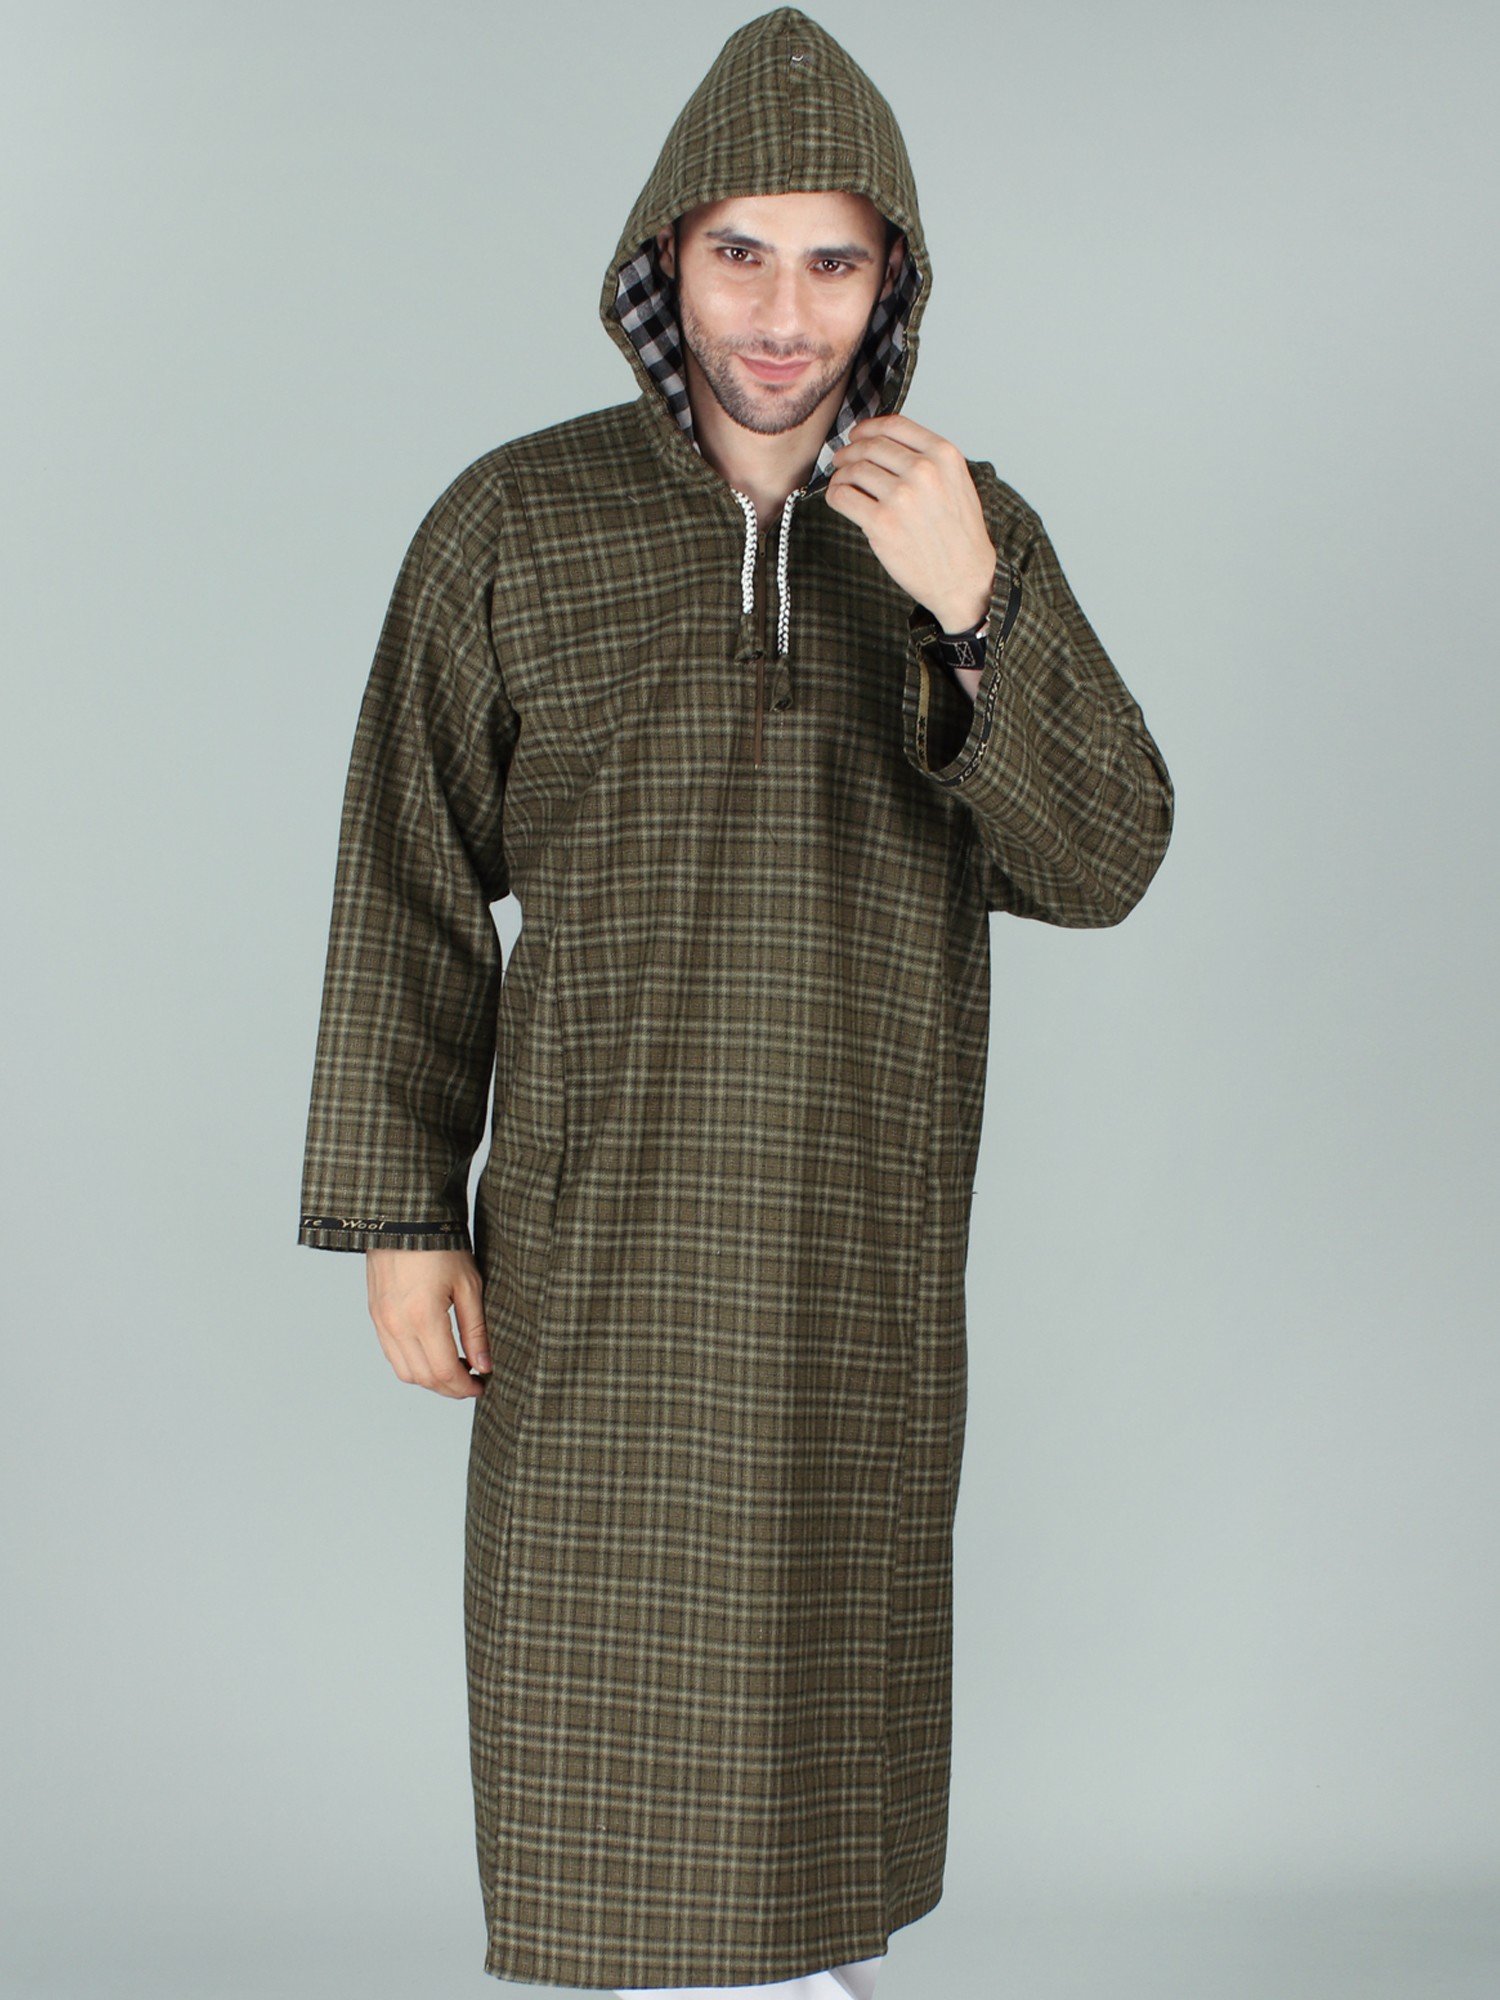 Exotic India Phiran for Men from Kashmir with Hood